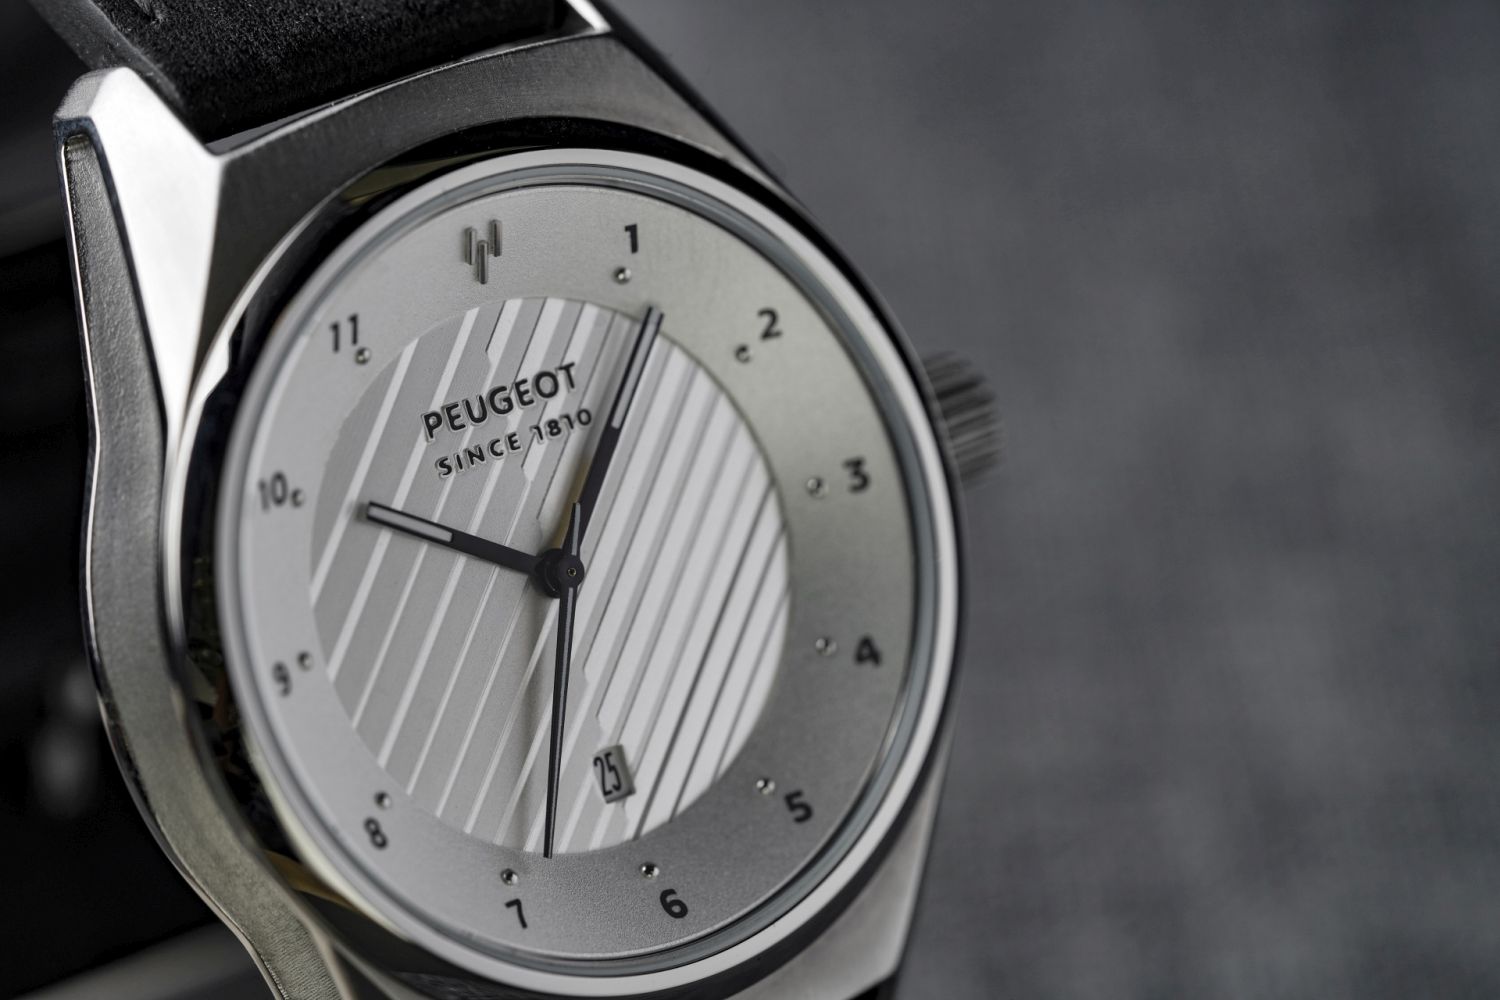 Peugeot Since 1810 watches